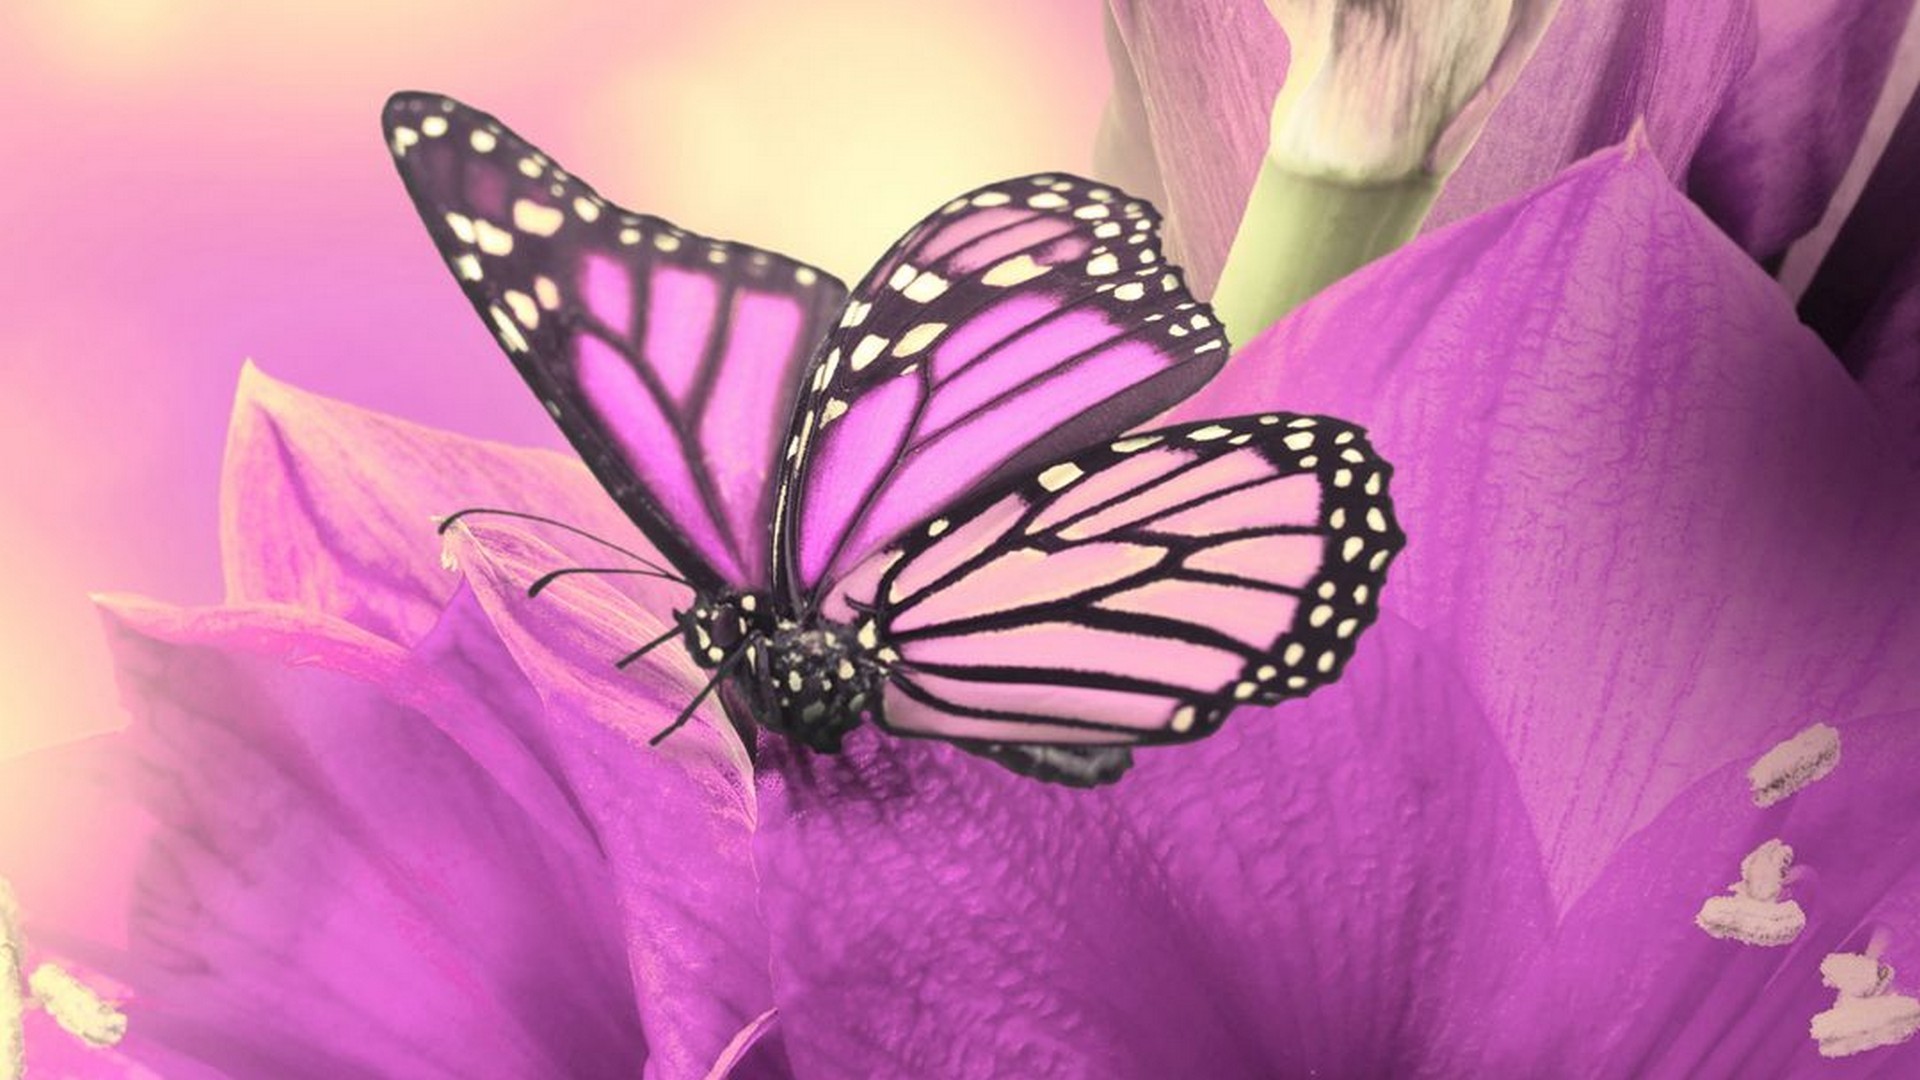 Wallpaper HD Cute Butterfly With Resolution 1920X1080